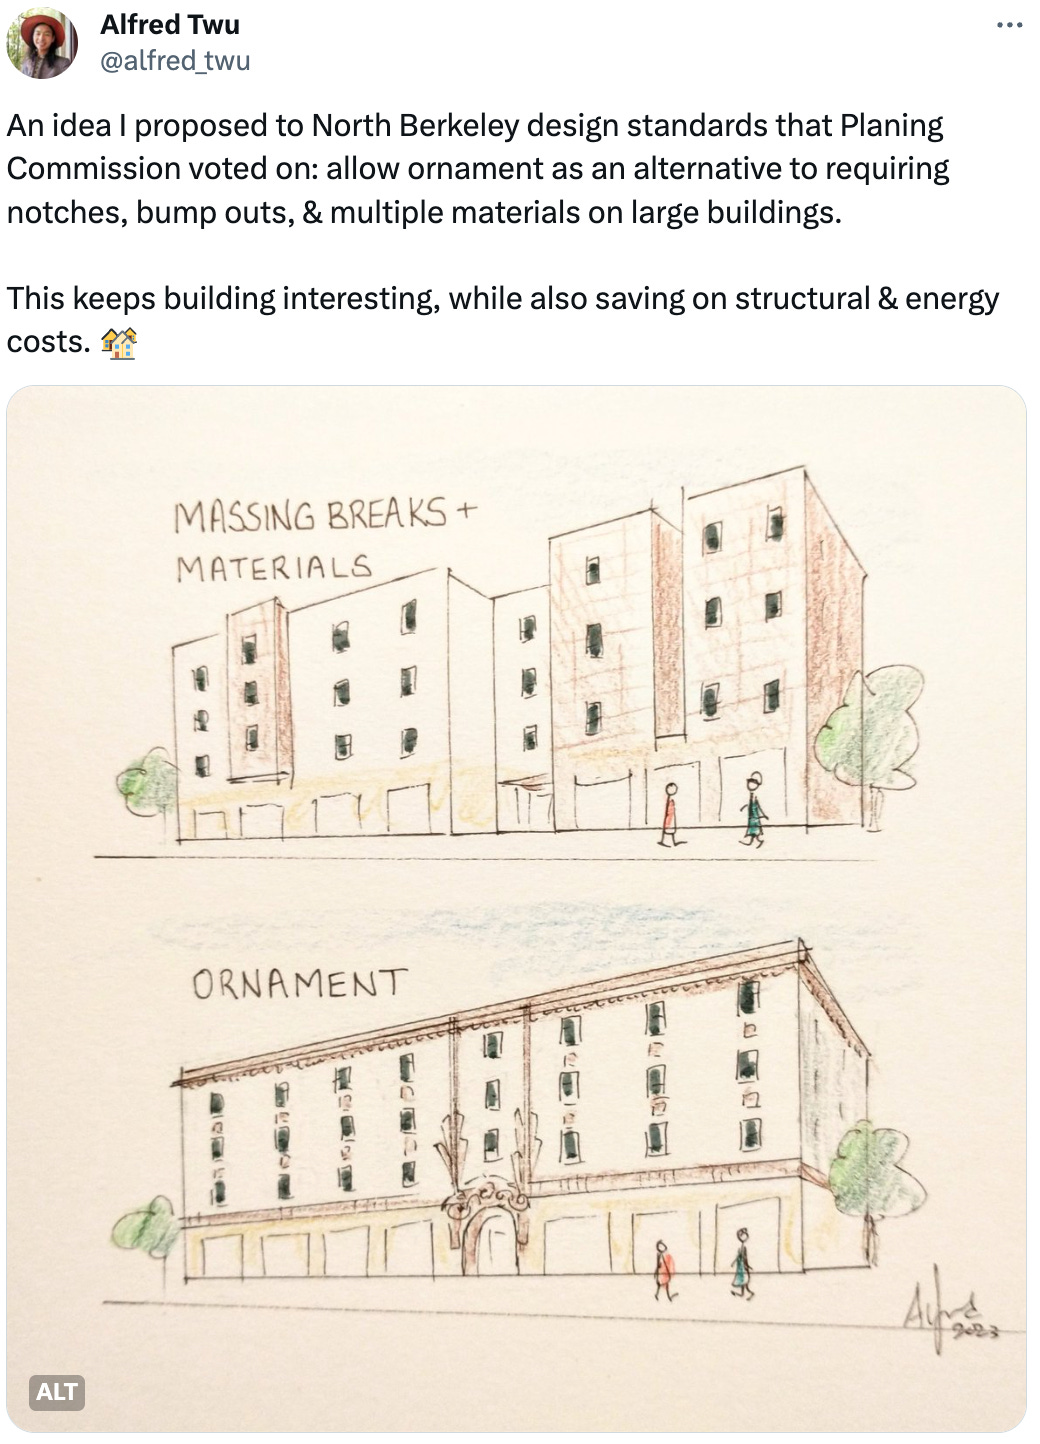  See new posts Conversation Alfred Twu @alfred_twu An idea I proposed to North Berkeley design standards that Planing Commission voted on: allow ornament as an alternative to requiring notches, bump outs, & multiple materials on large buildings.  This keeps building interesting, while also saving on structural & energy costs. 🏘️